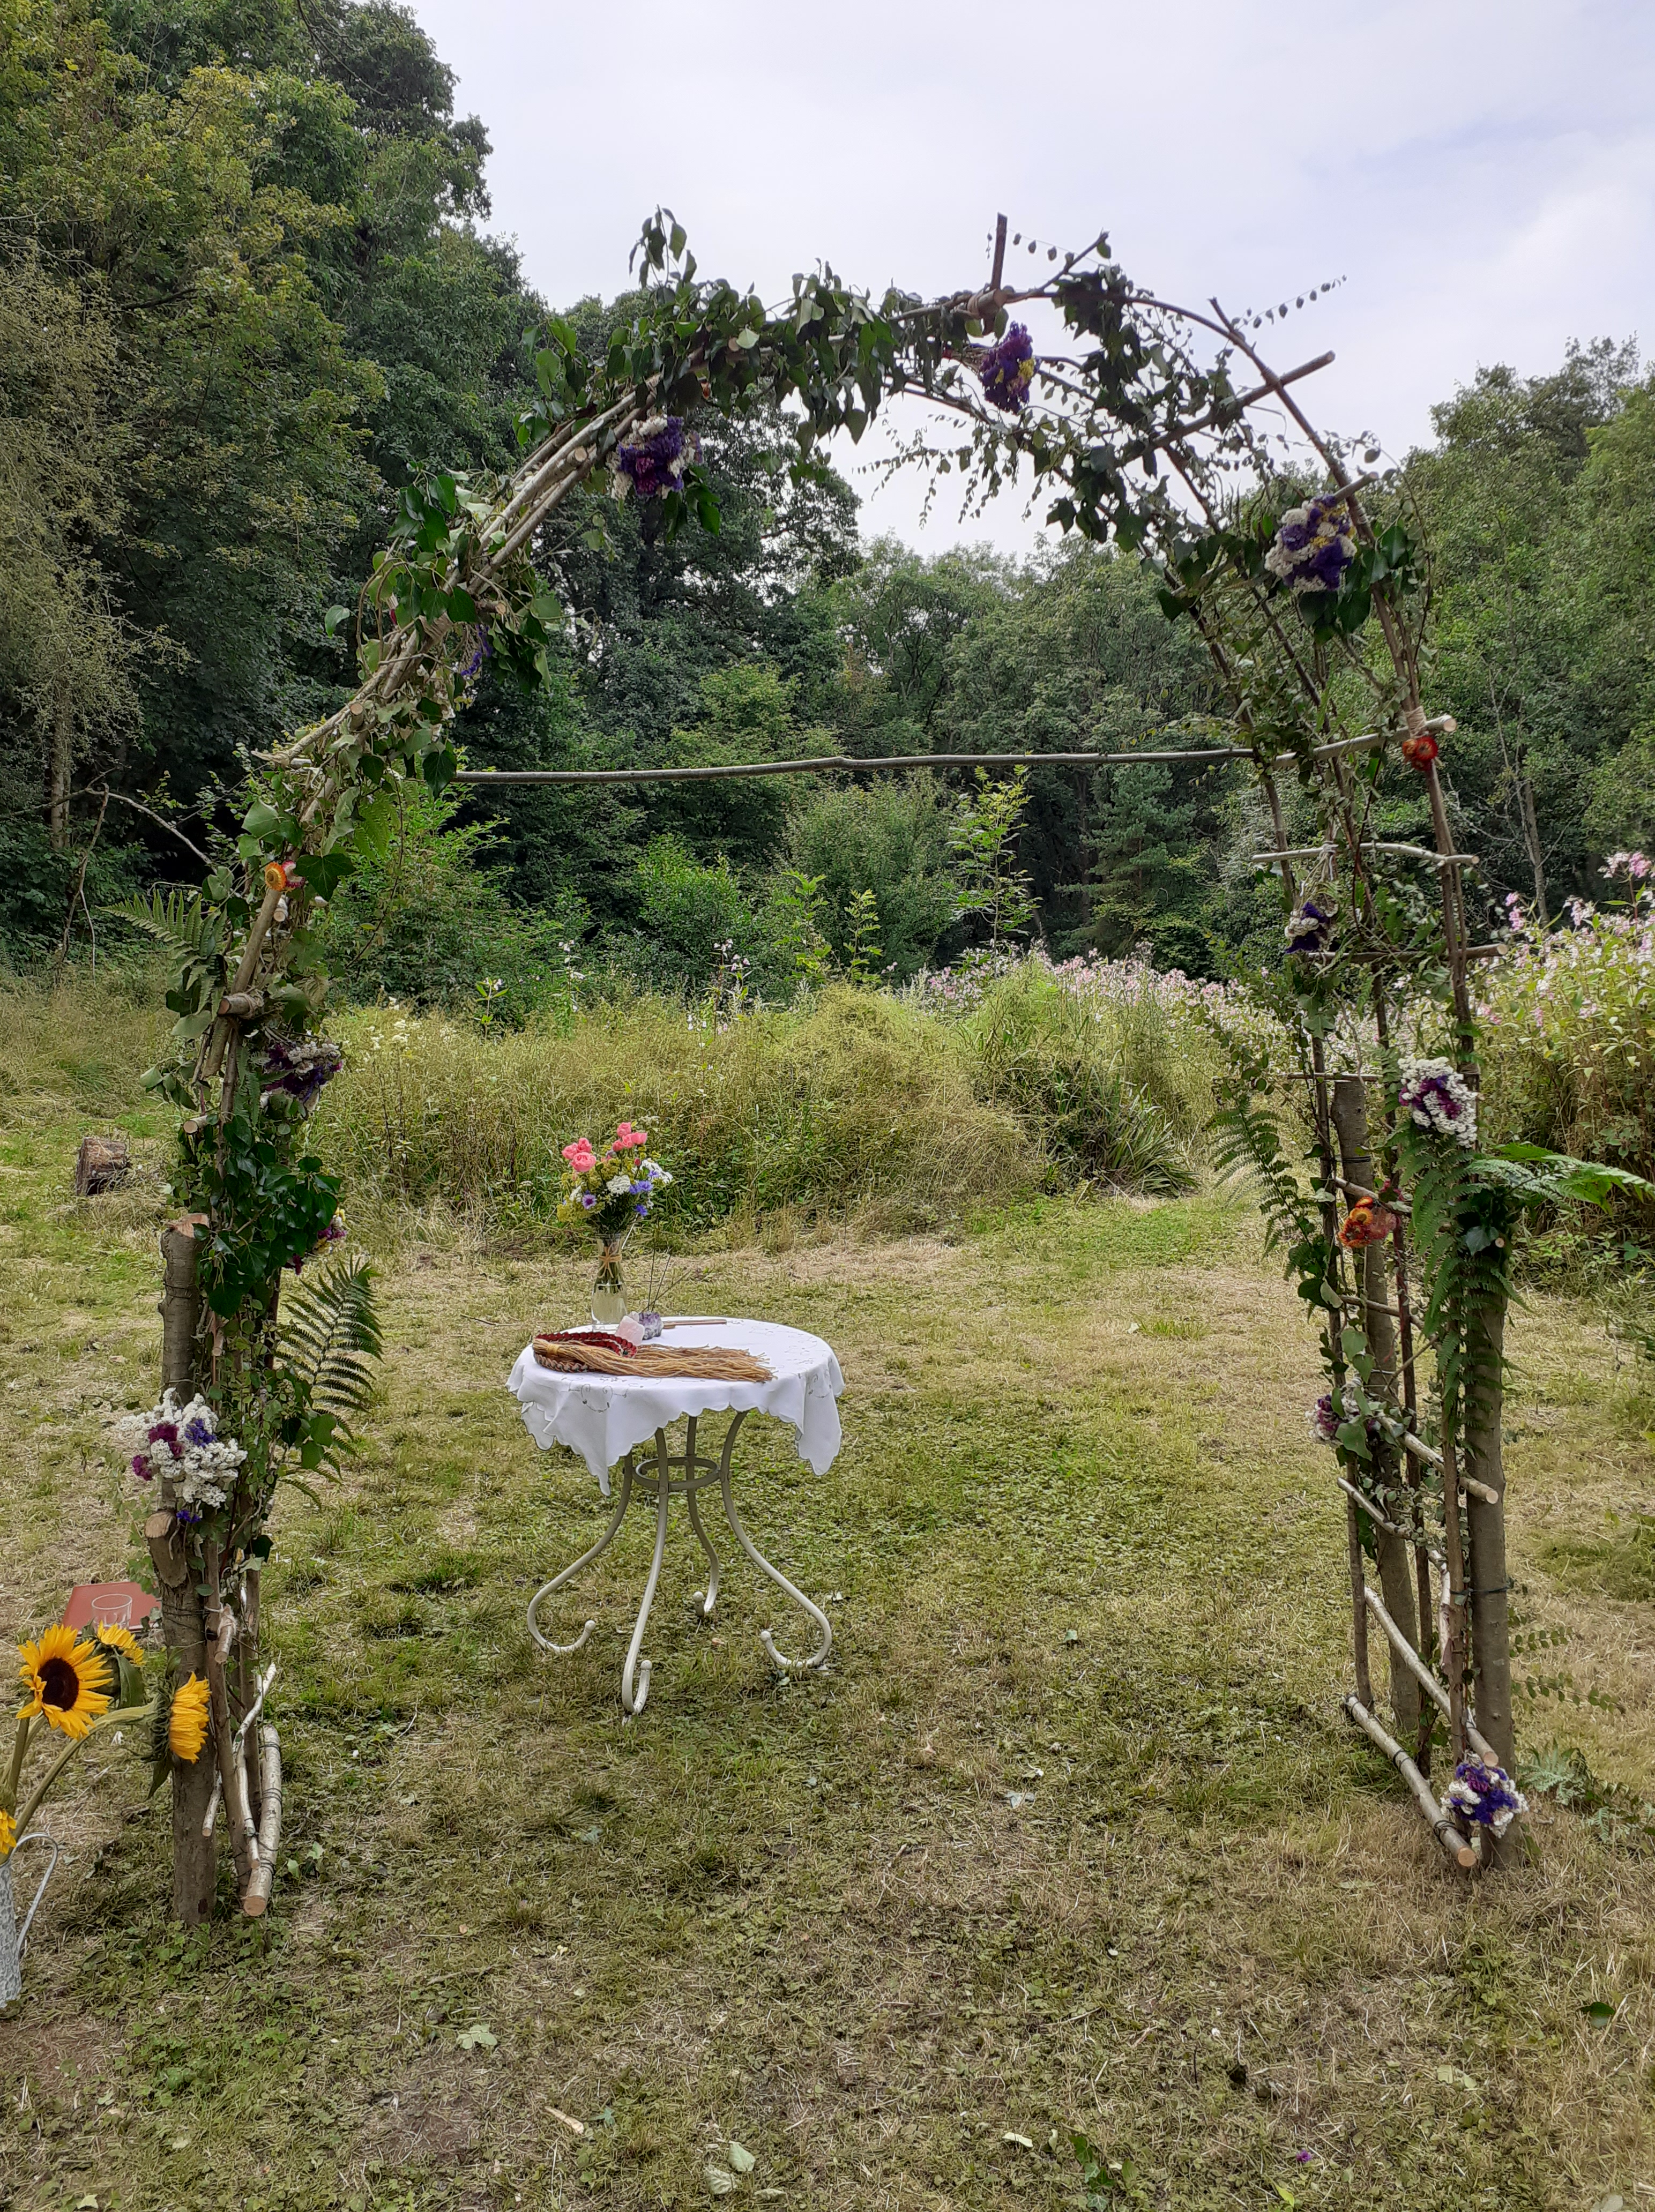 A DIY flower arch for an outdoor garden wedding. Beside it is a bucket of sunflowers and behind is an altar table with a Handfasting cord and vase of flowers. Taken by Keli Tomlin